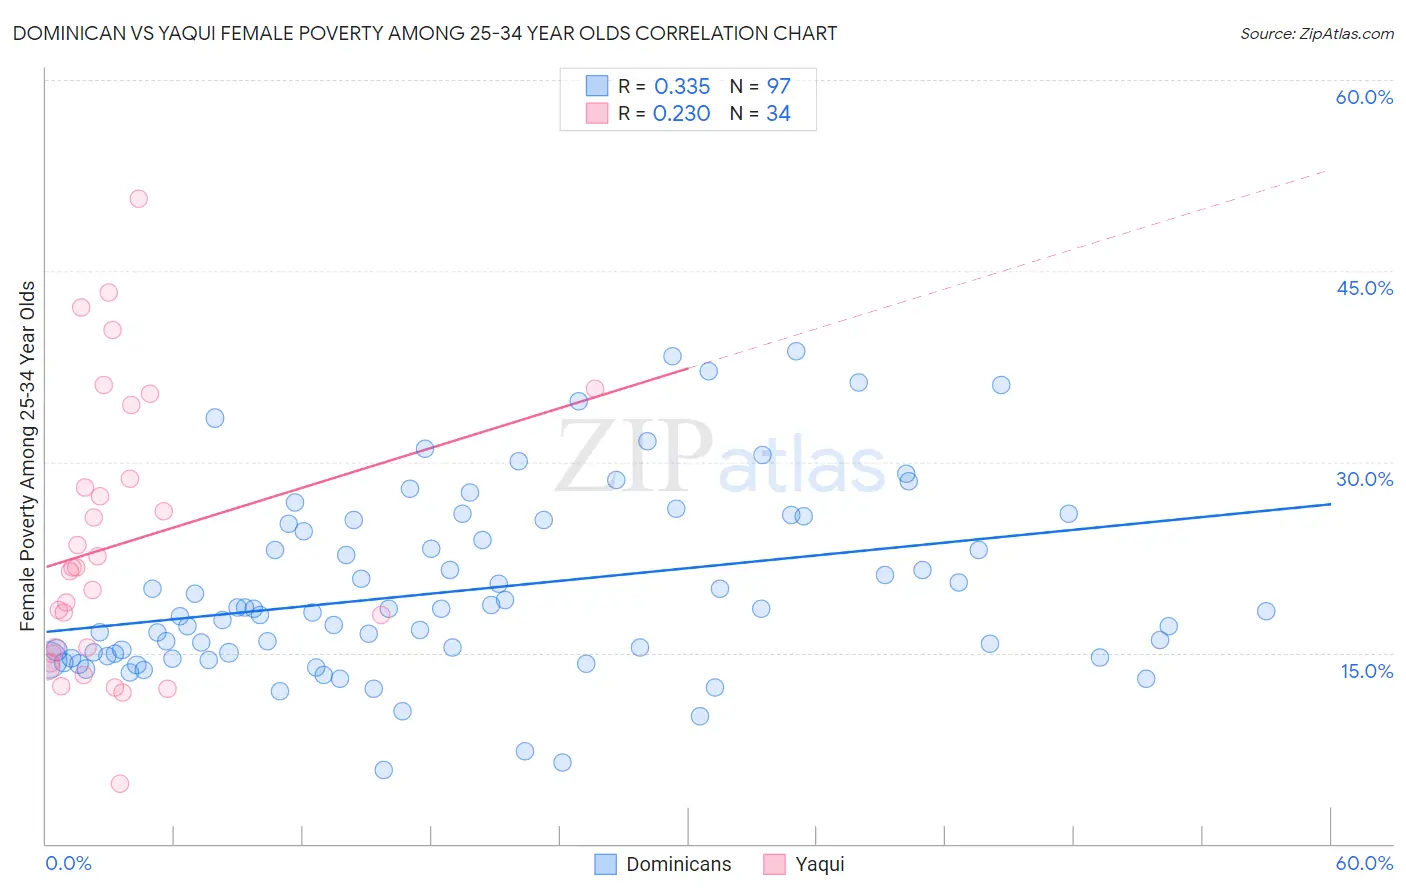 Dominican vs Yaqui Female Poverty Among 25-34 Year Olds